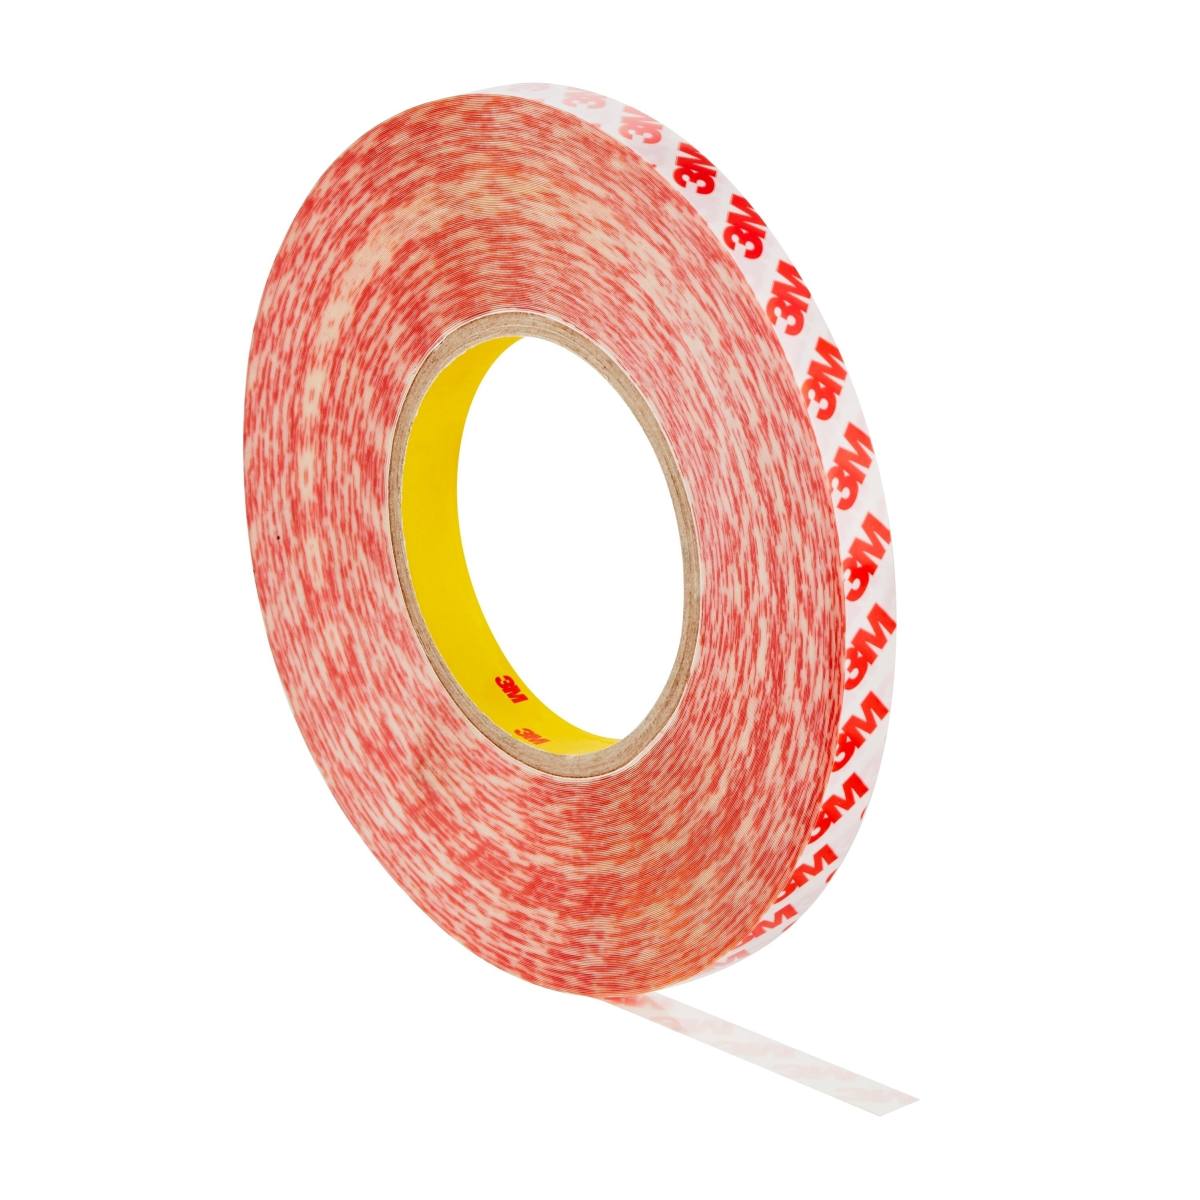 3M Double-sided adhesive tape with polyester backing GPT-020P, transparent, 6 mm x 50 m, 0.202 mm